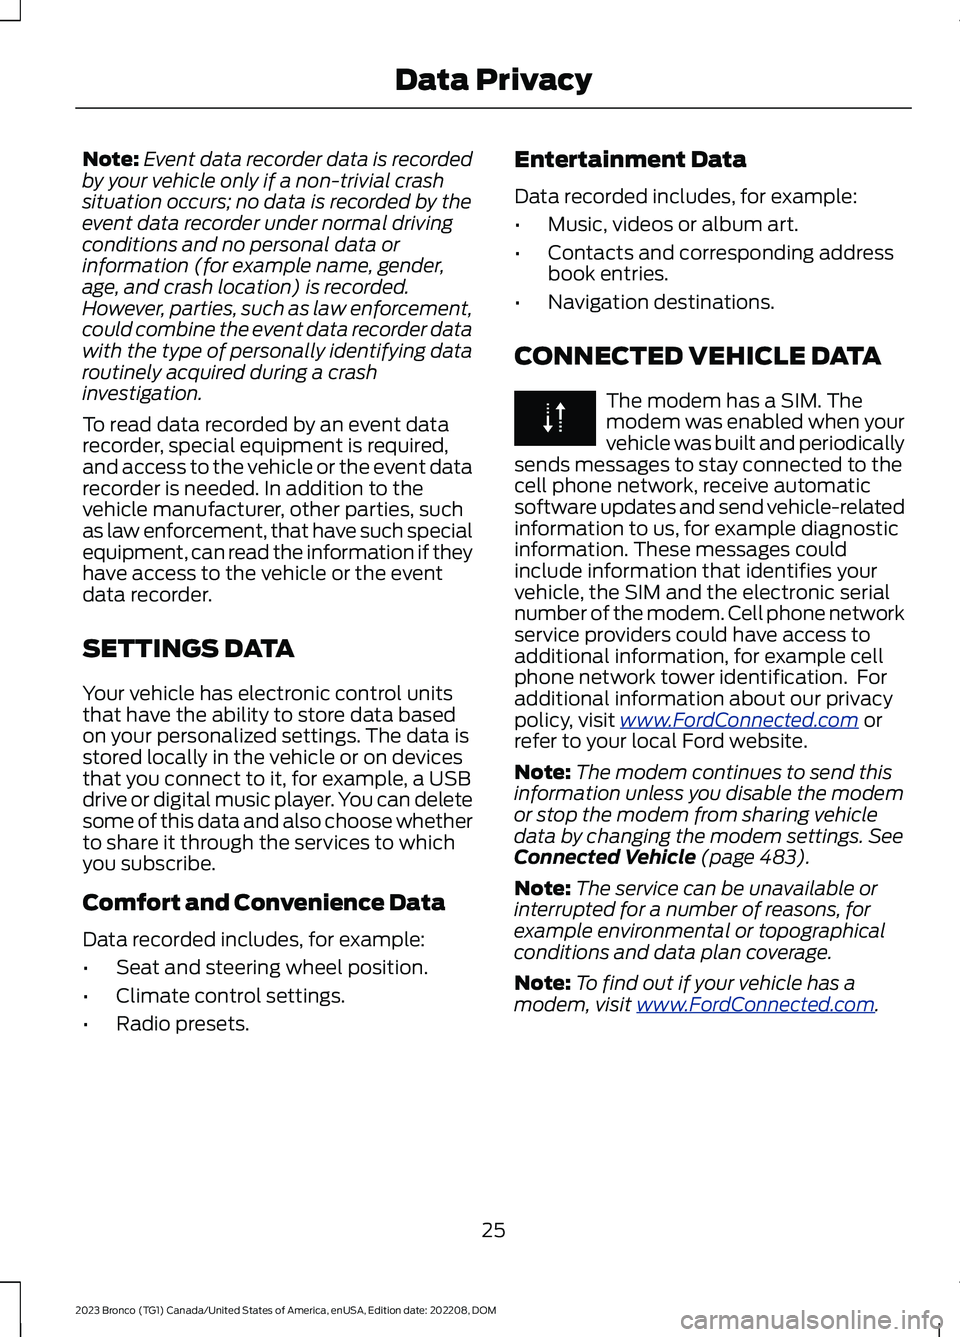 FORD BRONCO 2023  Owners Manual Note:Event data recorder data is recordedby your vehicle only if a non-trivial crashsituation occurs; no data is recorded by theevent data recorder under normal drivingconditions and no personal data 